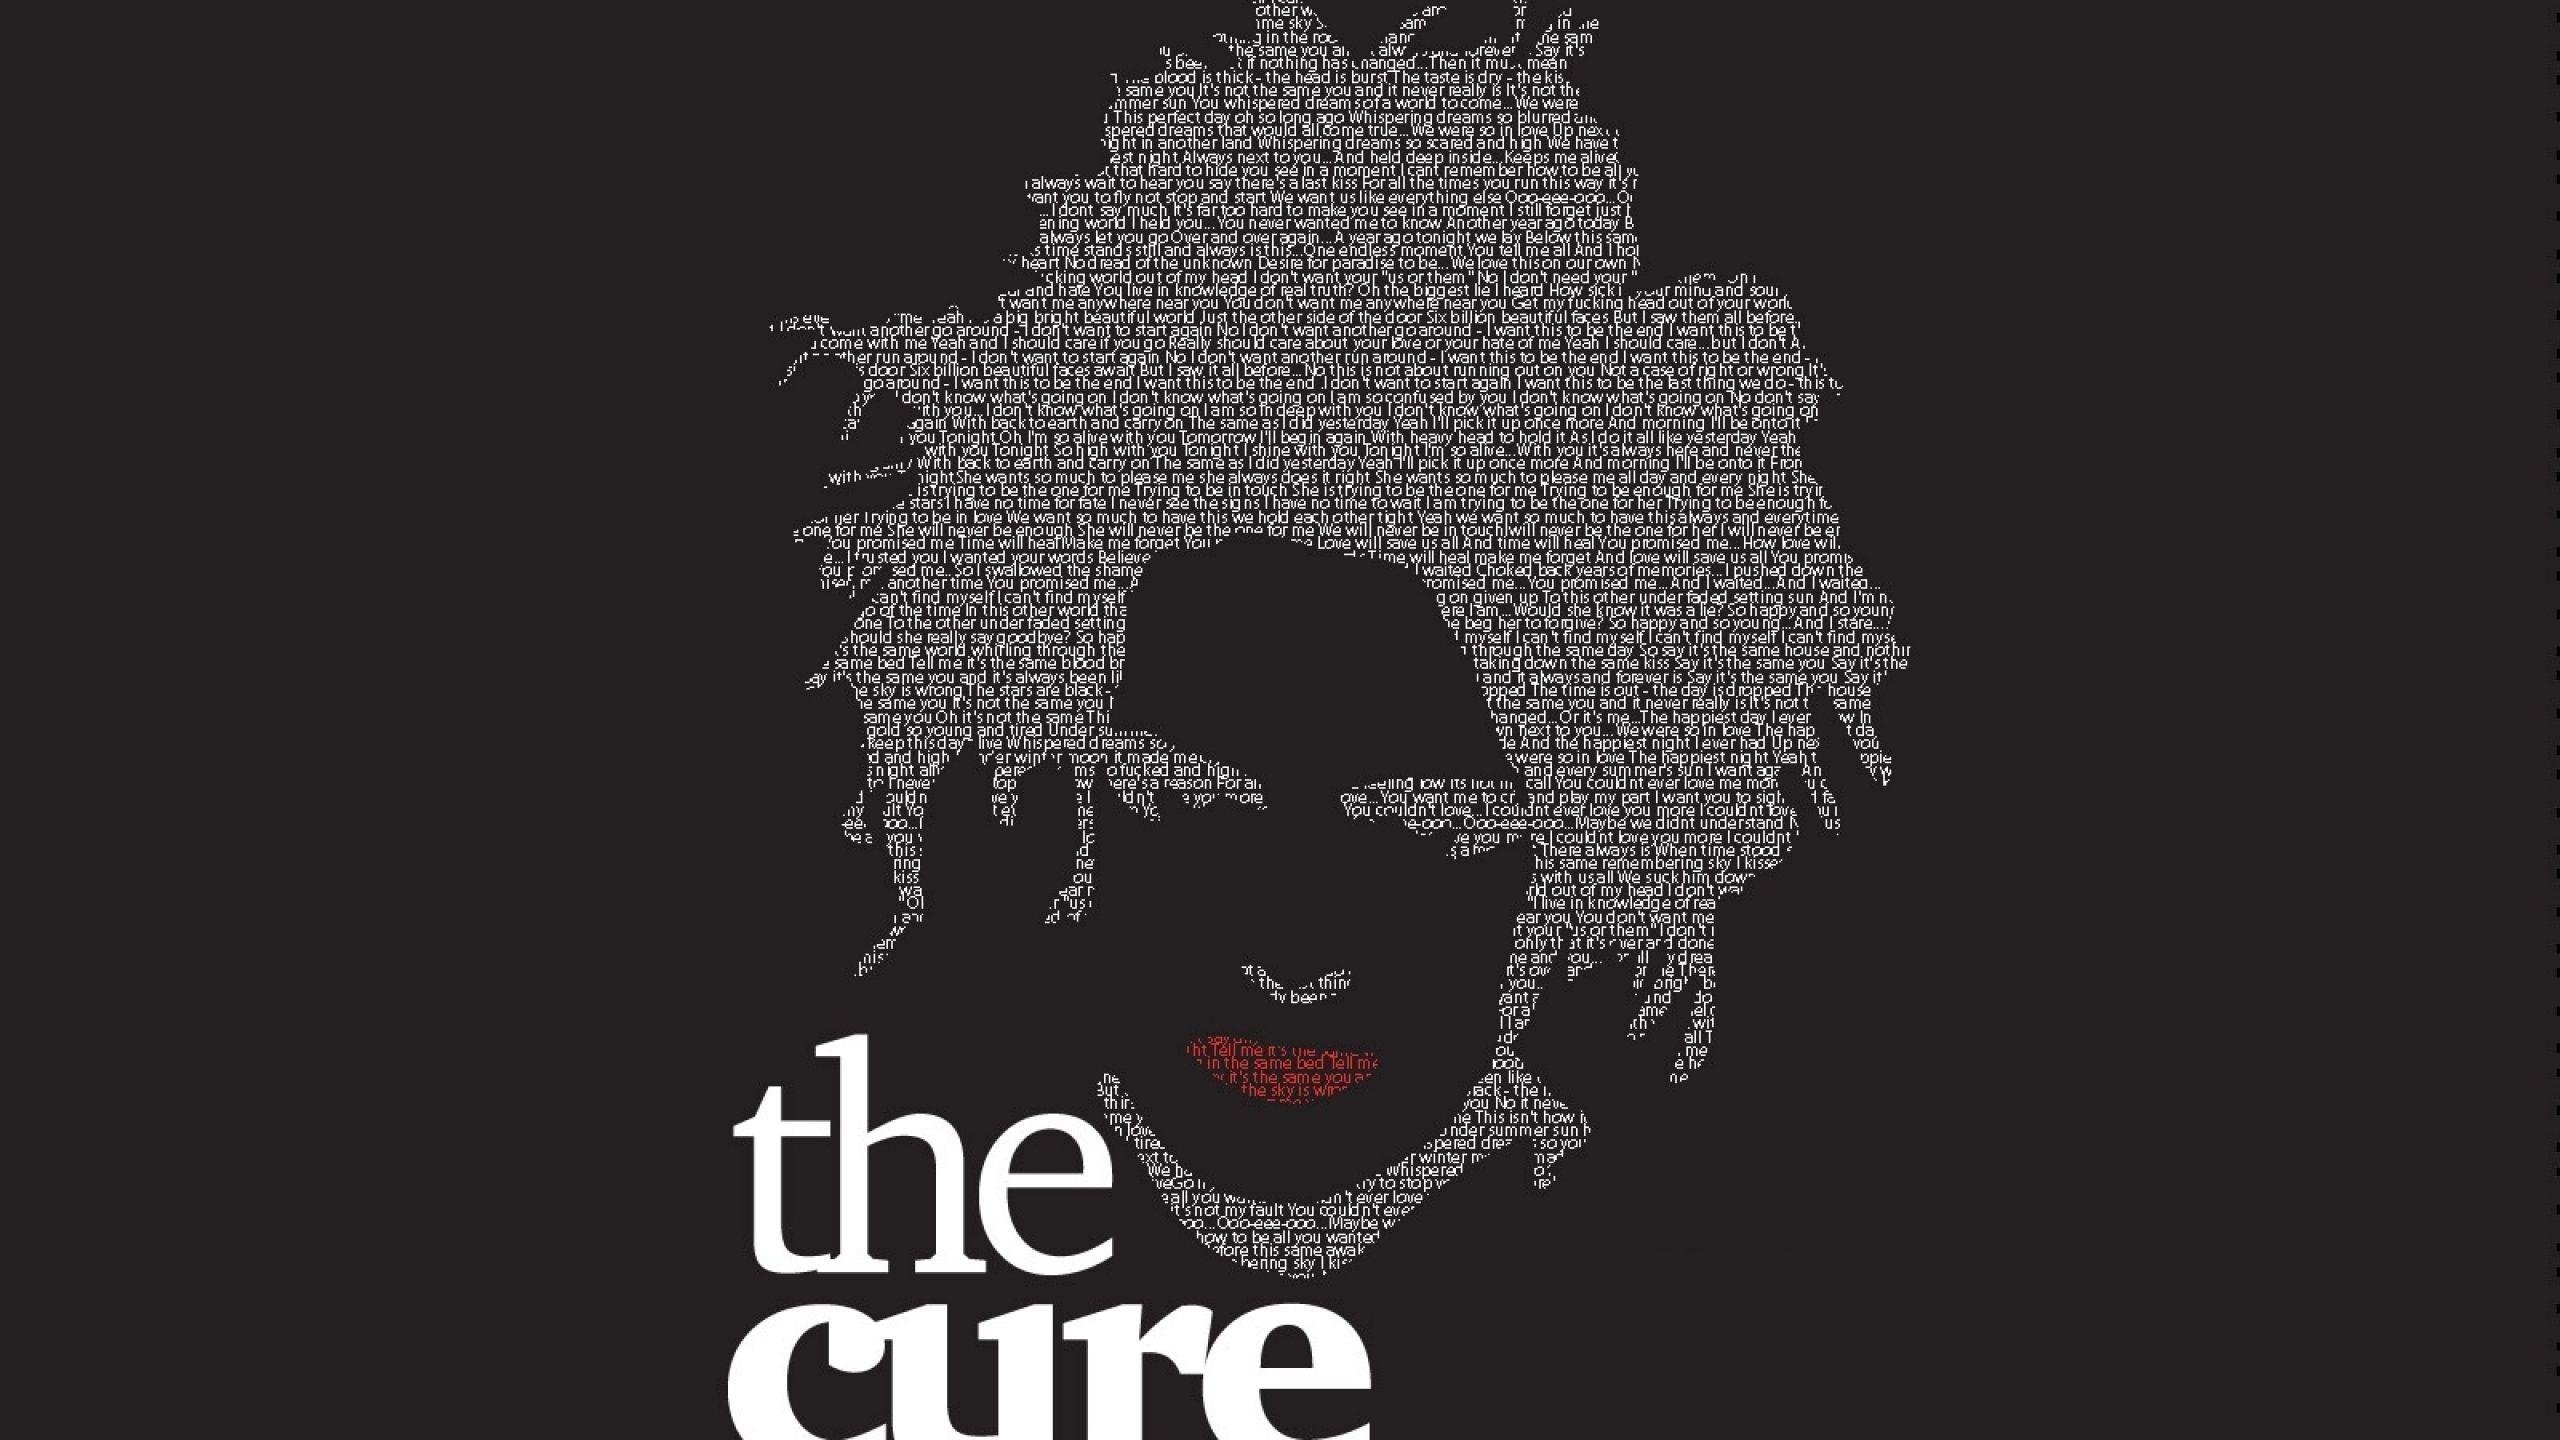 Download Wallpapers 2560x1440 The cure, Silhouette, Name, Text.